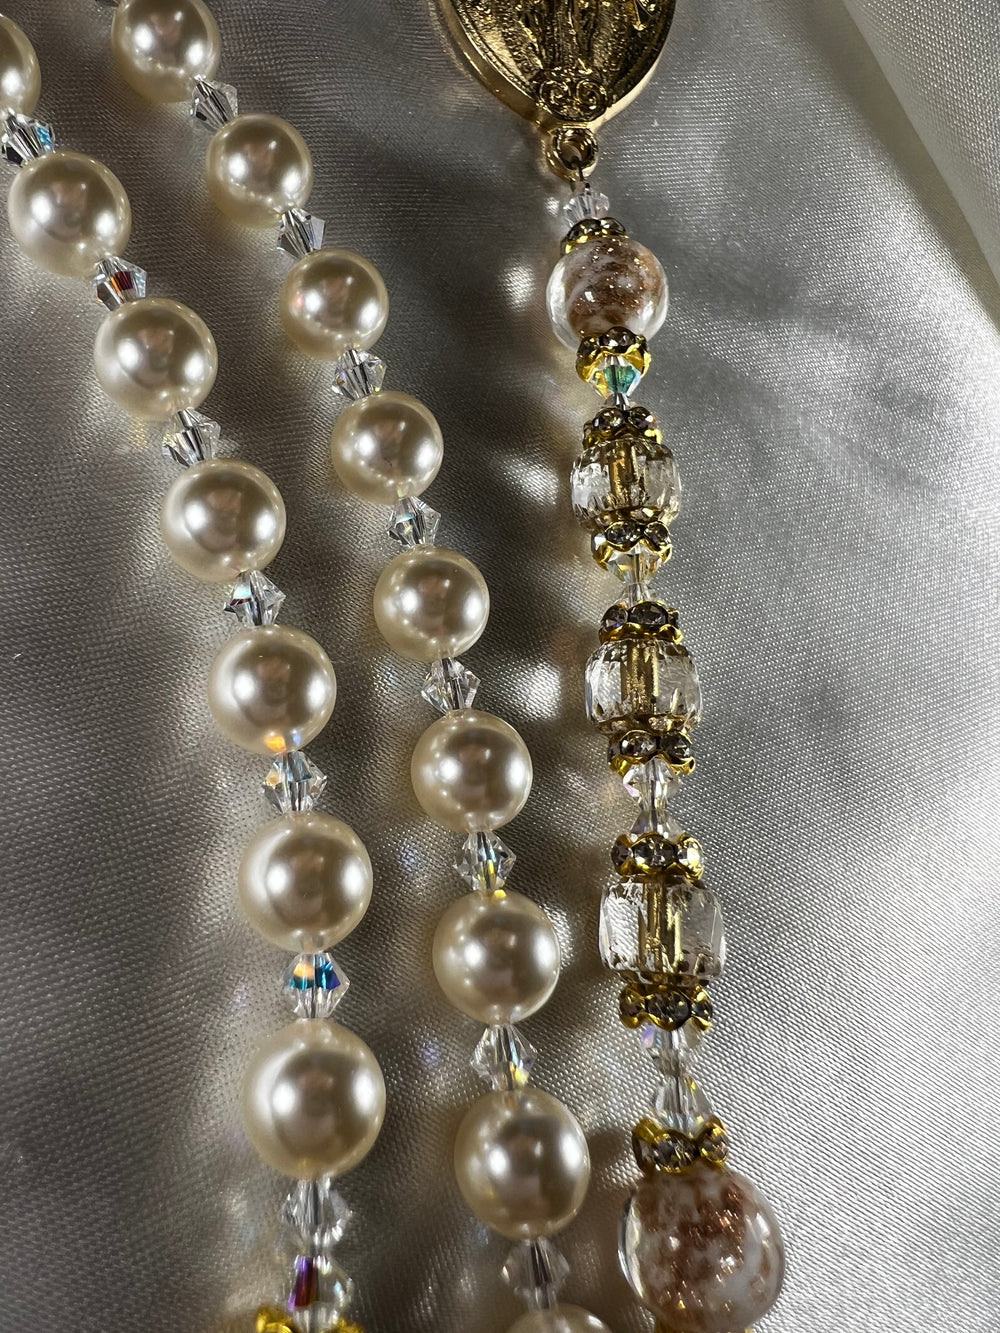 Beautiful Cathedral Hail Mary Beads!!